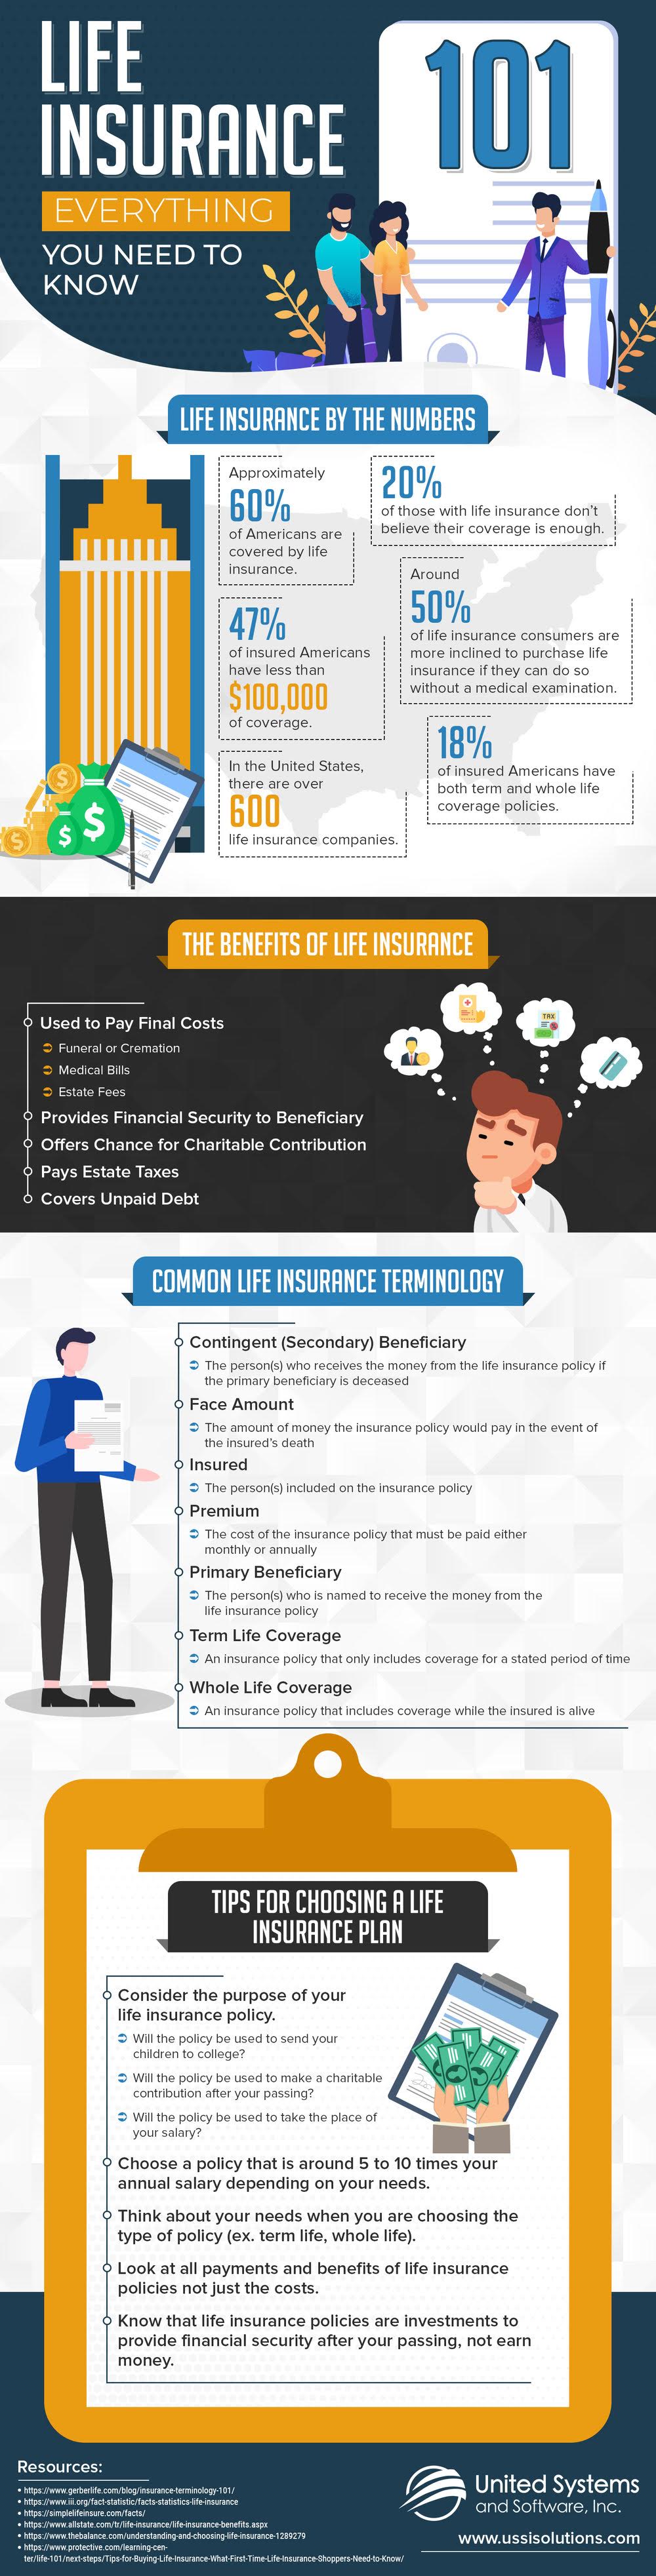 Life Insurance 101: Everything You Need to Know #infographic